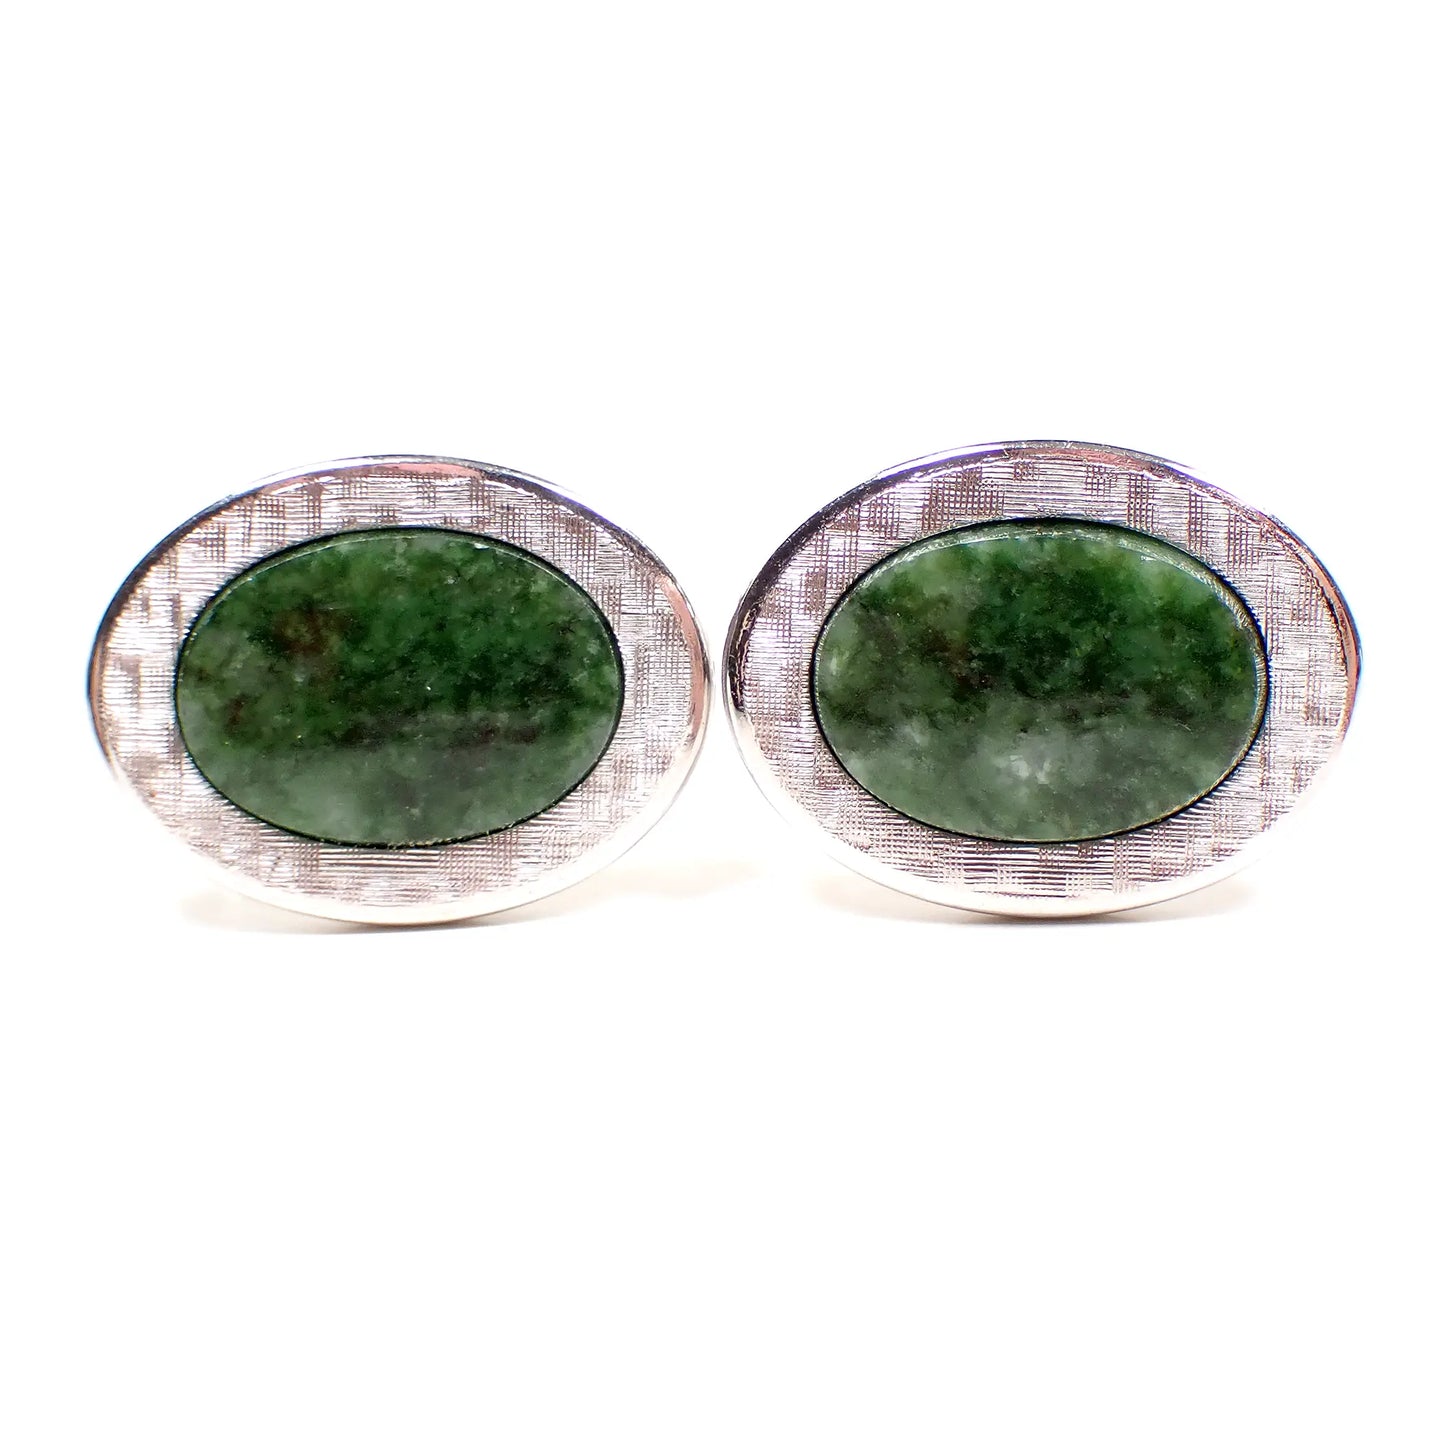 Front view of the retro vintage Krementz cufflinks. The metal is silver tone color and has a brushed matte appearance on the fronts. They are oval in shape with green moss agate gemstone cabs in the middle. The gemstone cabs have different shades of green. 